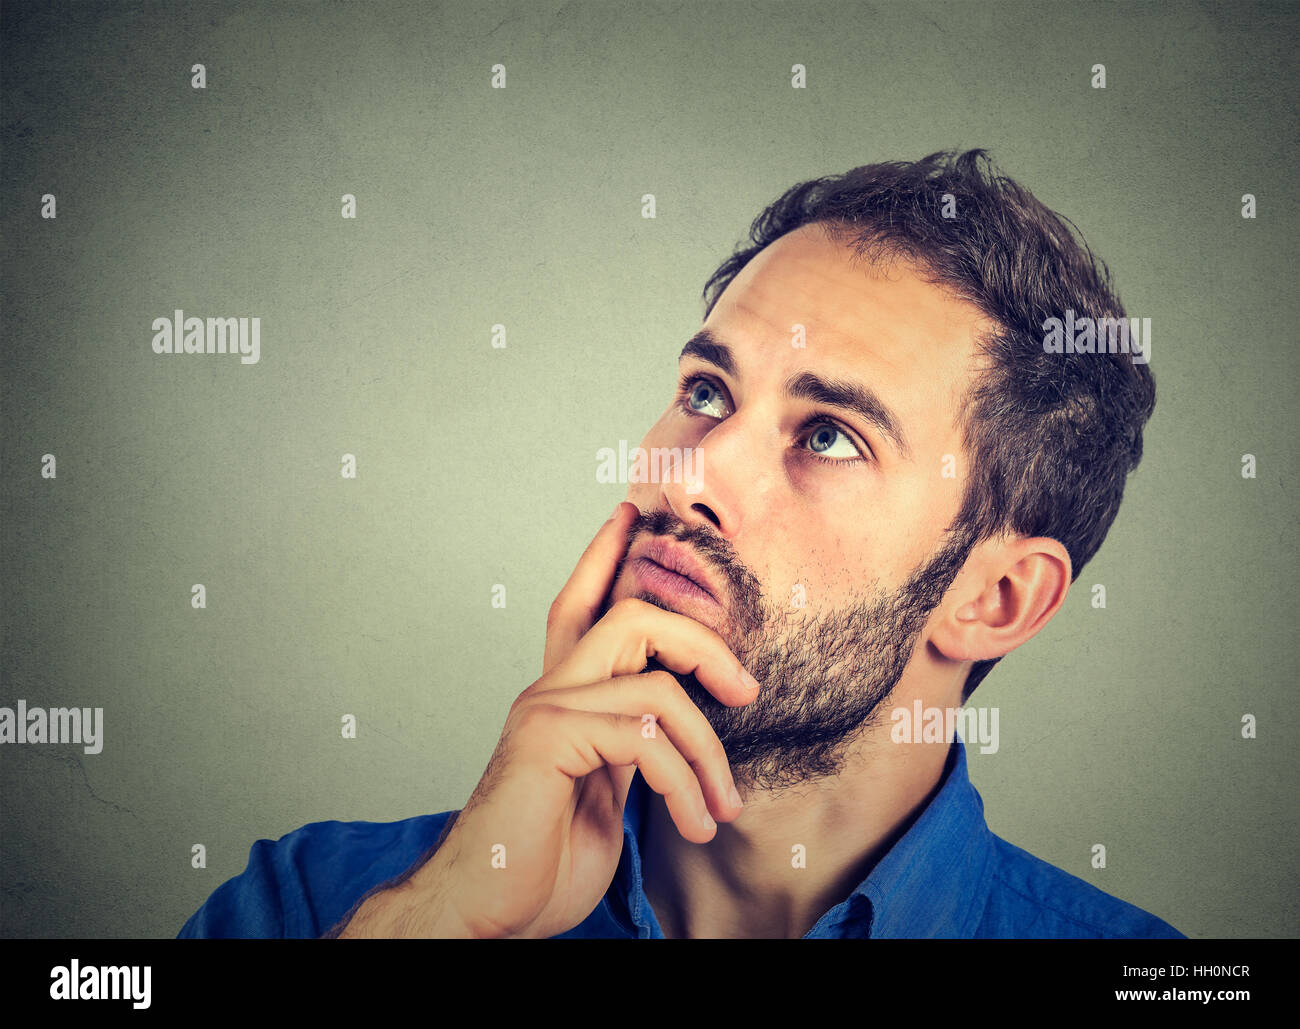 Closeup portrait of a man resting chin on hand thinking daydreaming, staring thoughtfully upwards, copy space to left, isolated on gray wall backgroun Stock Photo